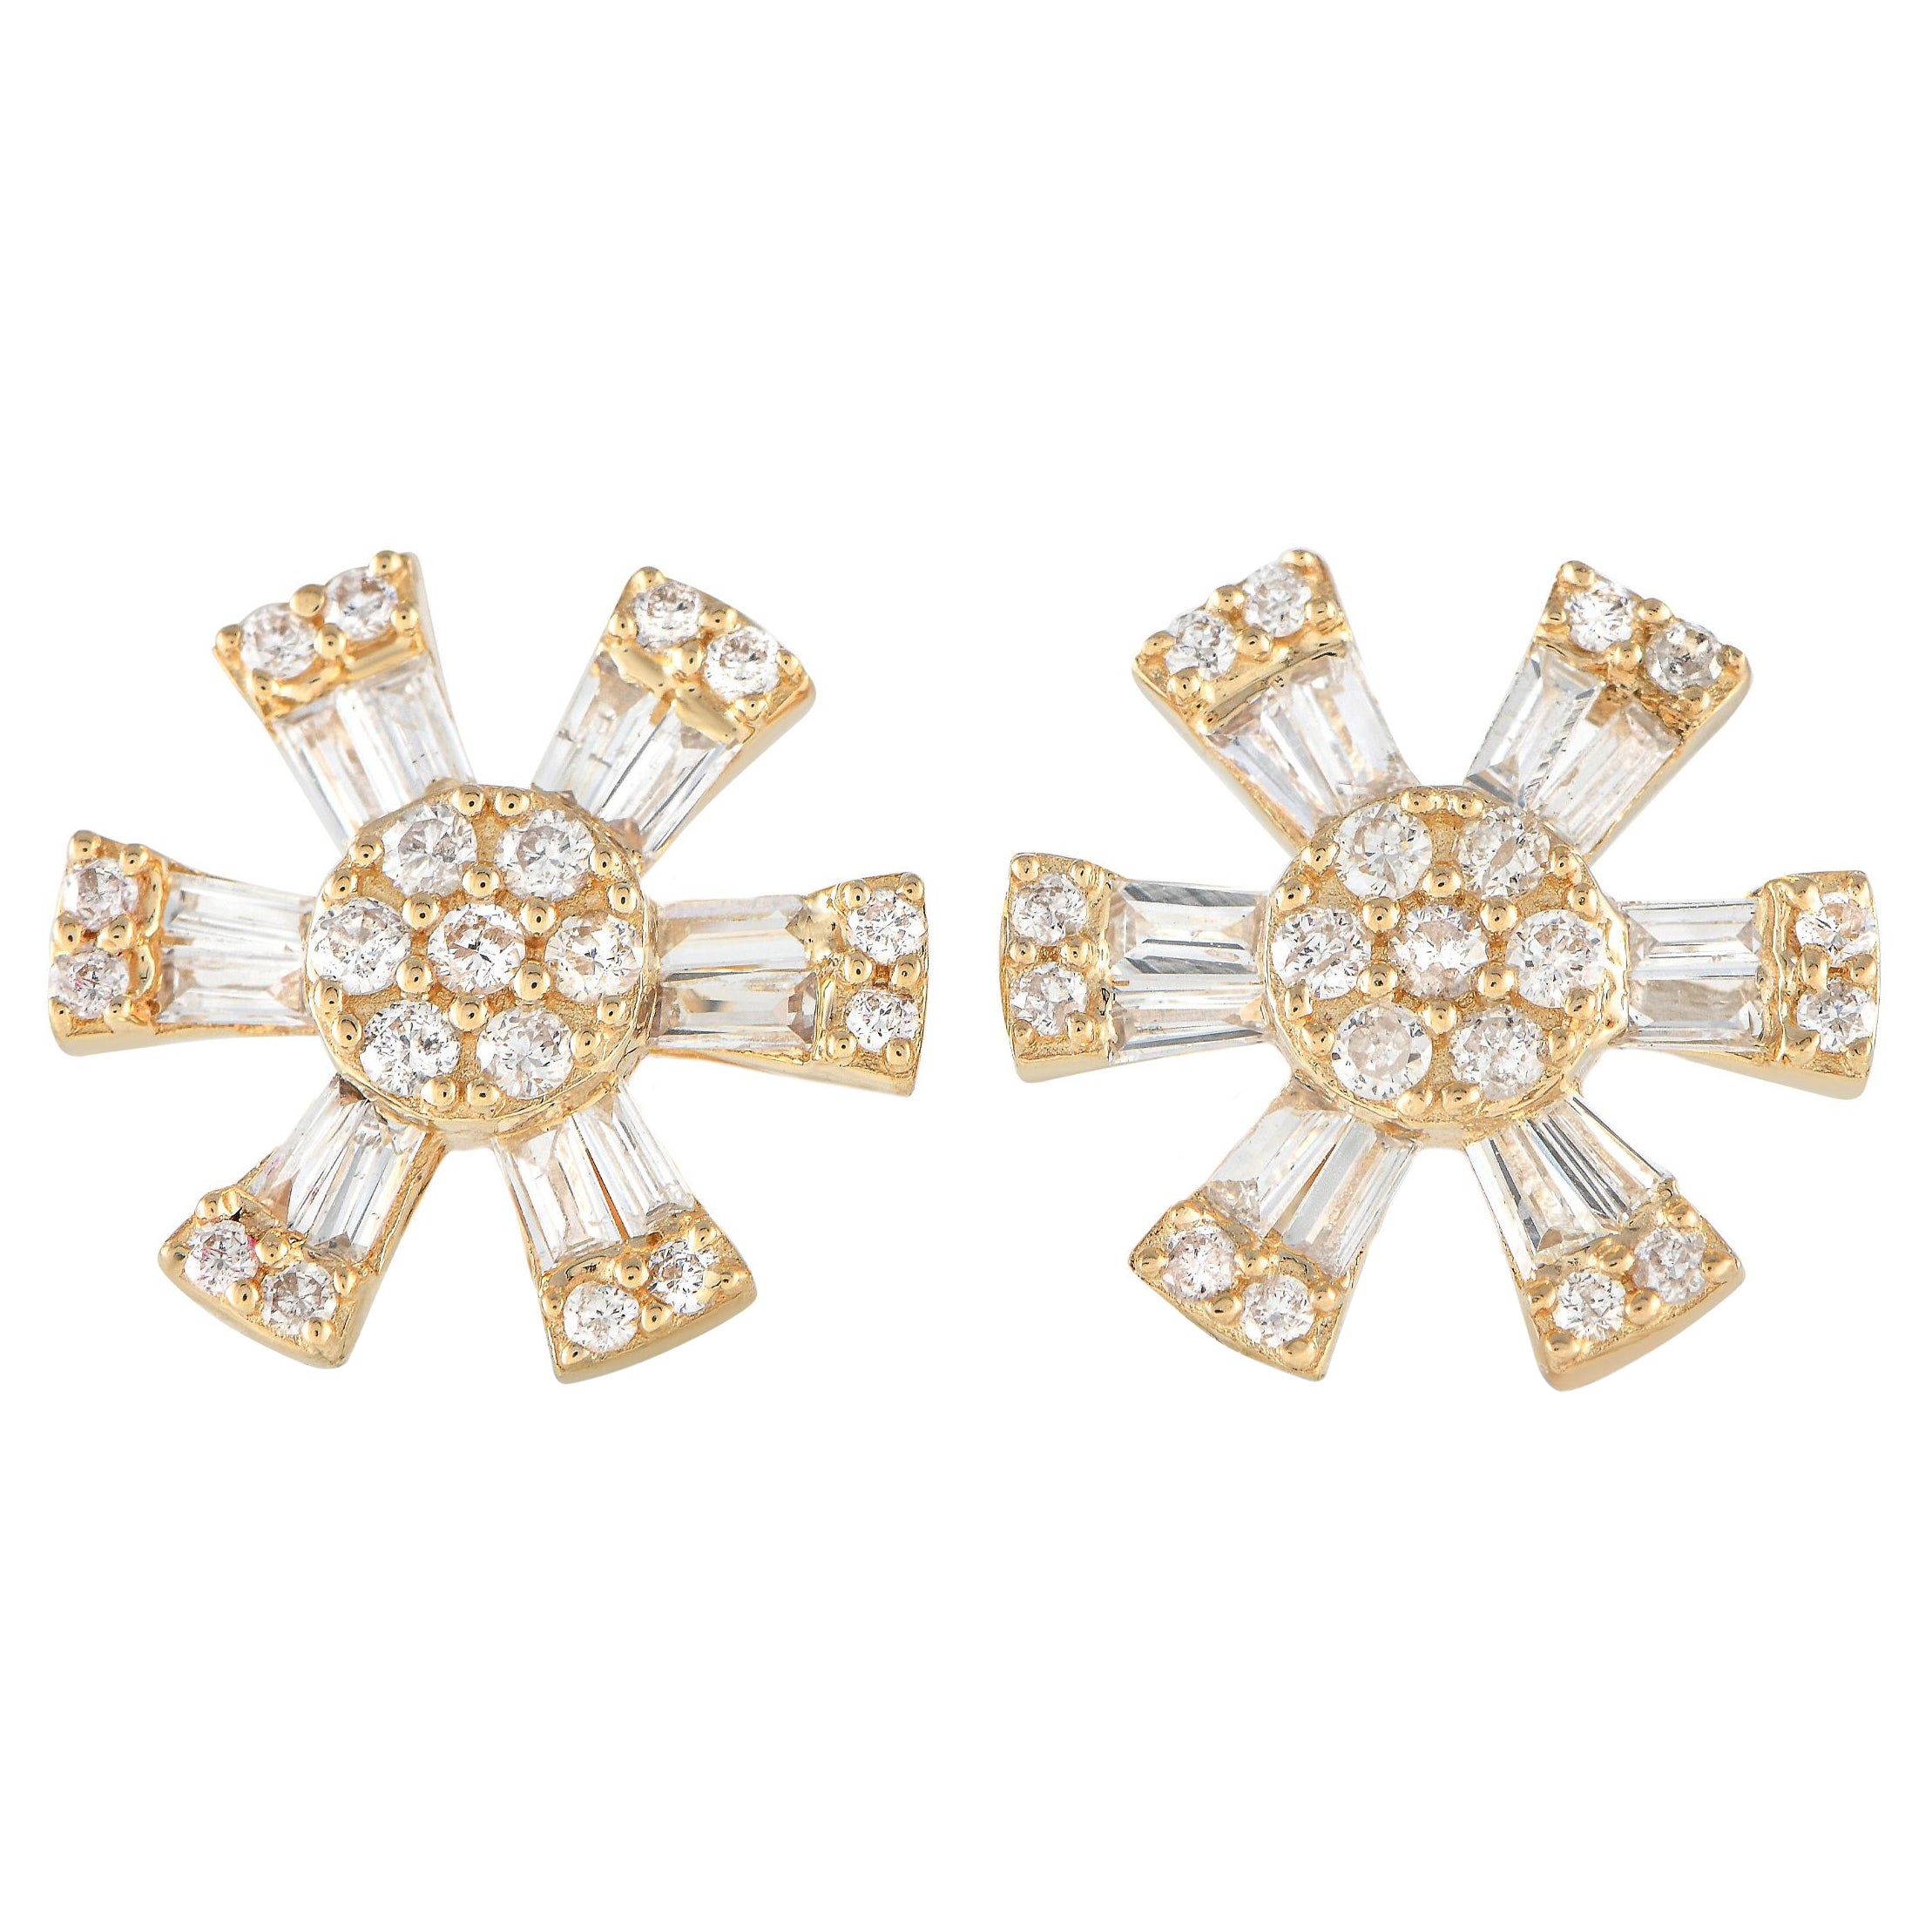 LB Exclusive 14K Yellow Gold 0.43ct Diamond Earrings For Sale